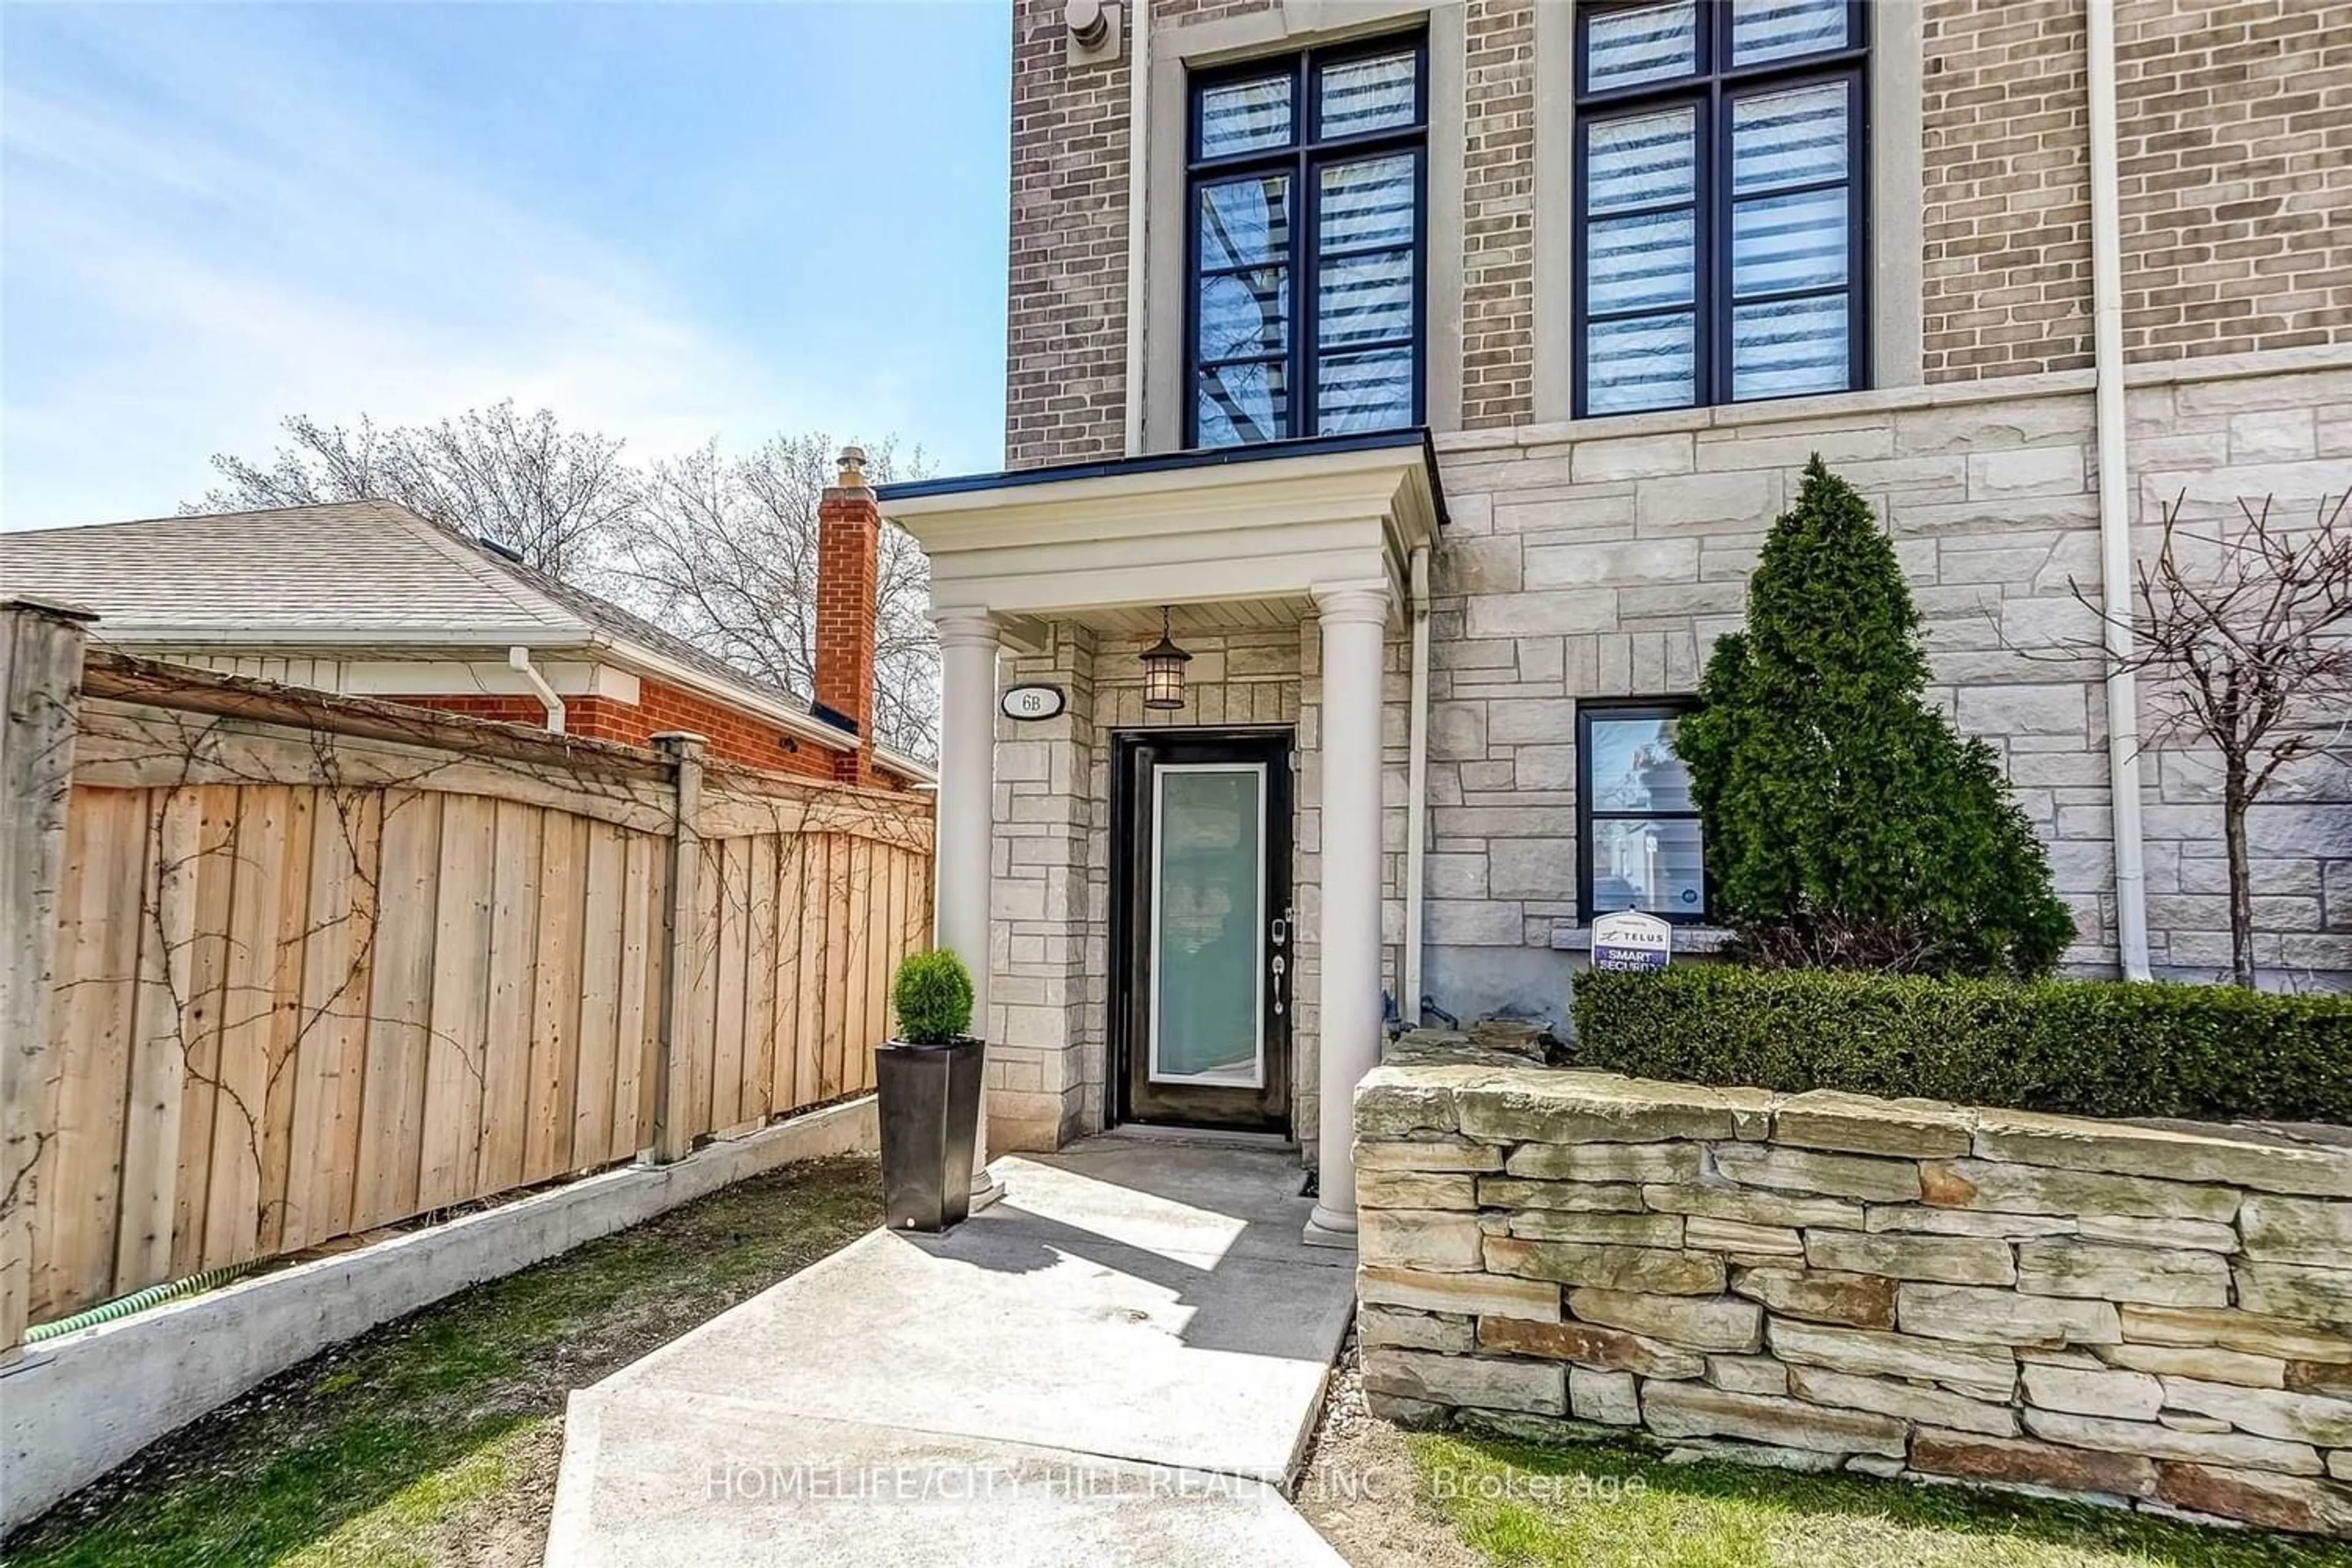 Home with brick exterior material for 6B Acorn Ave, Toronto Ontario M9B 0B7